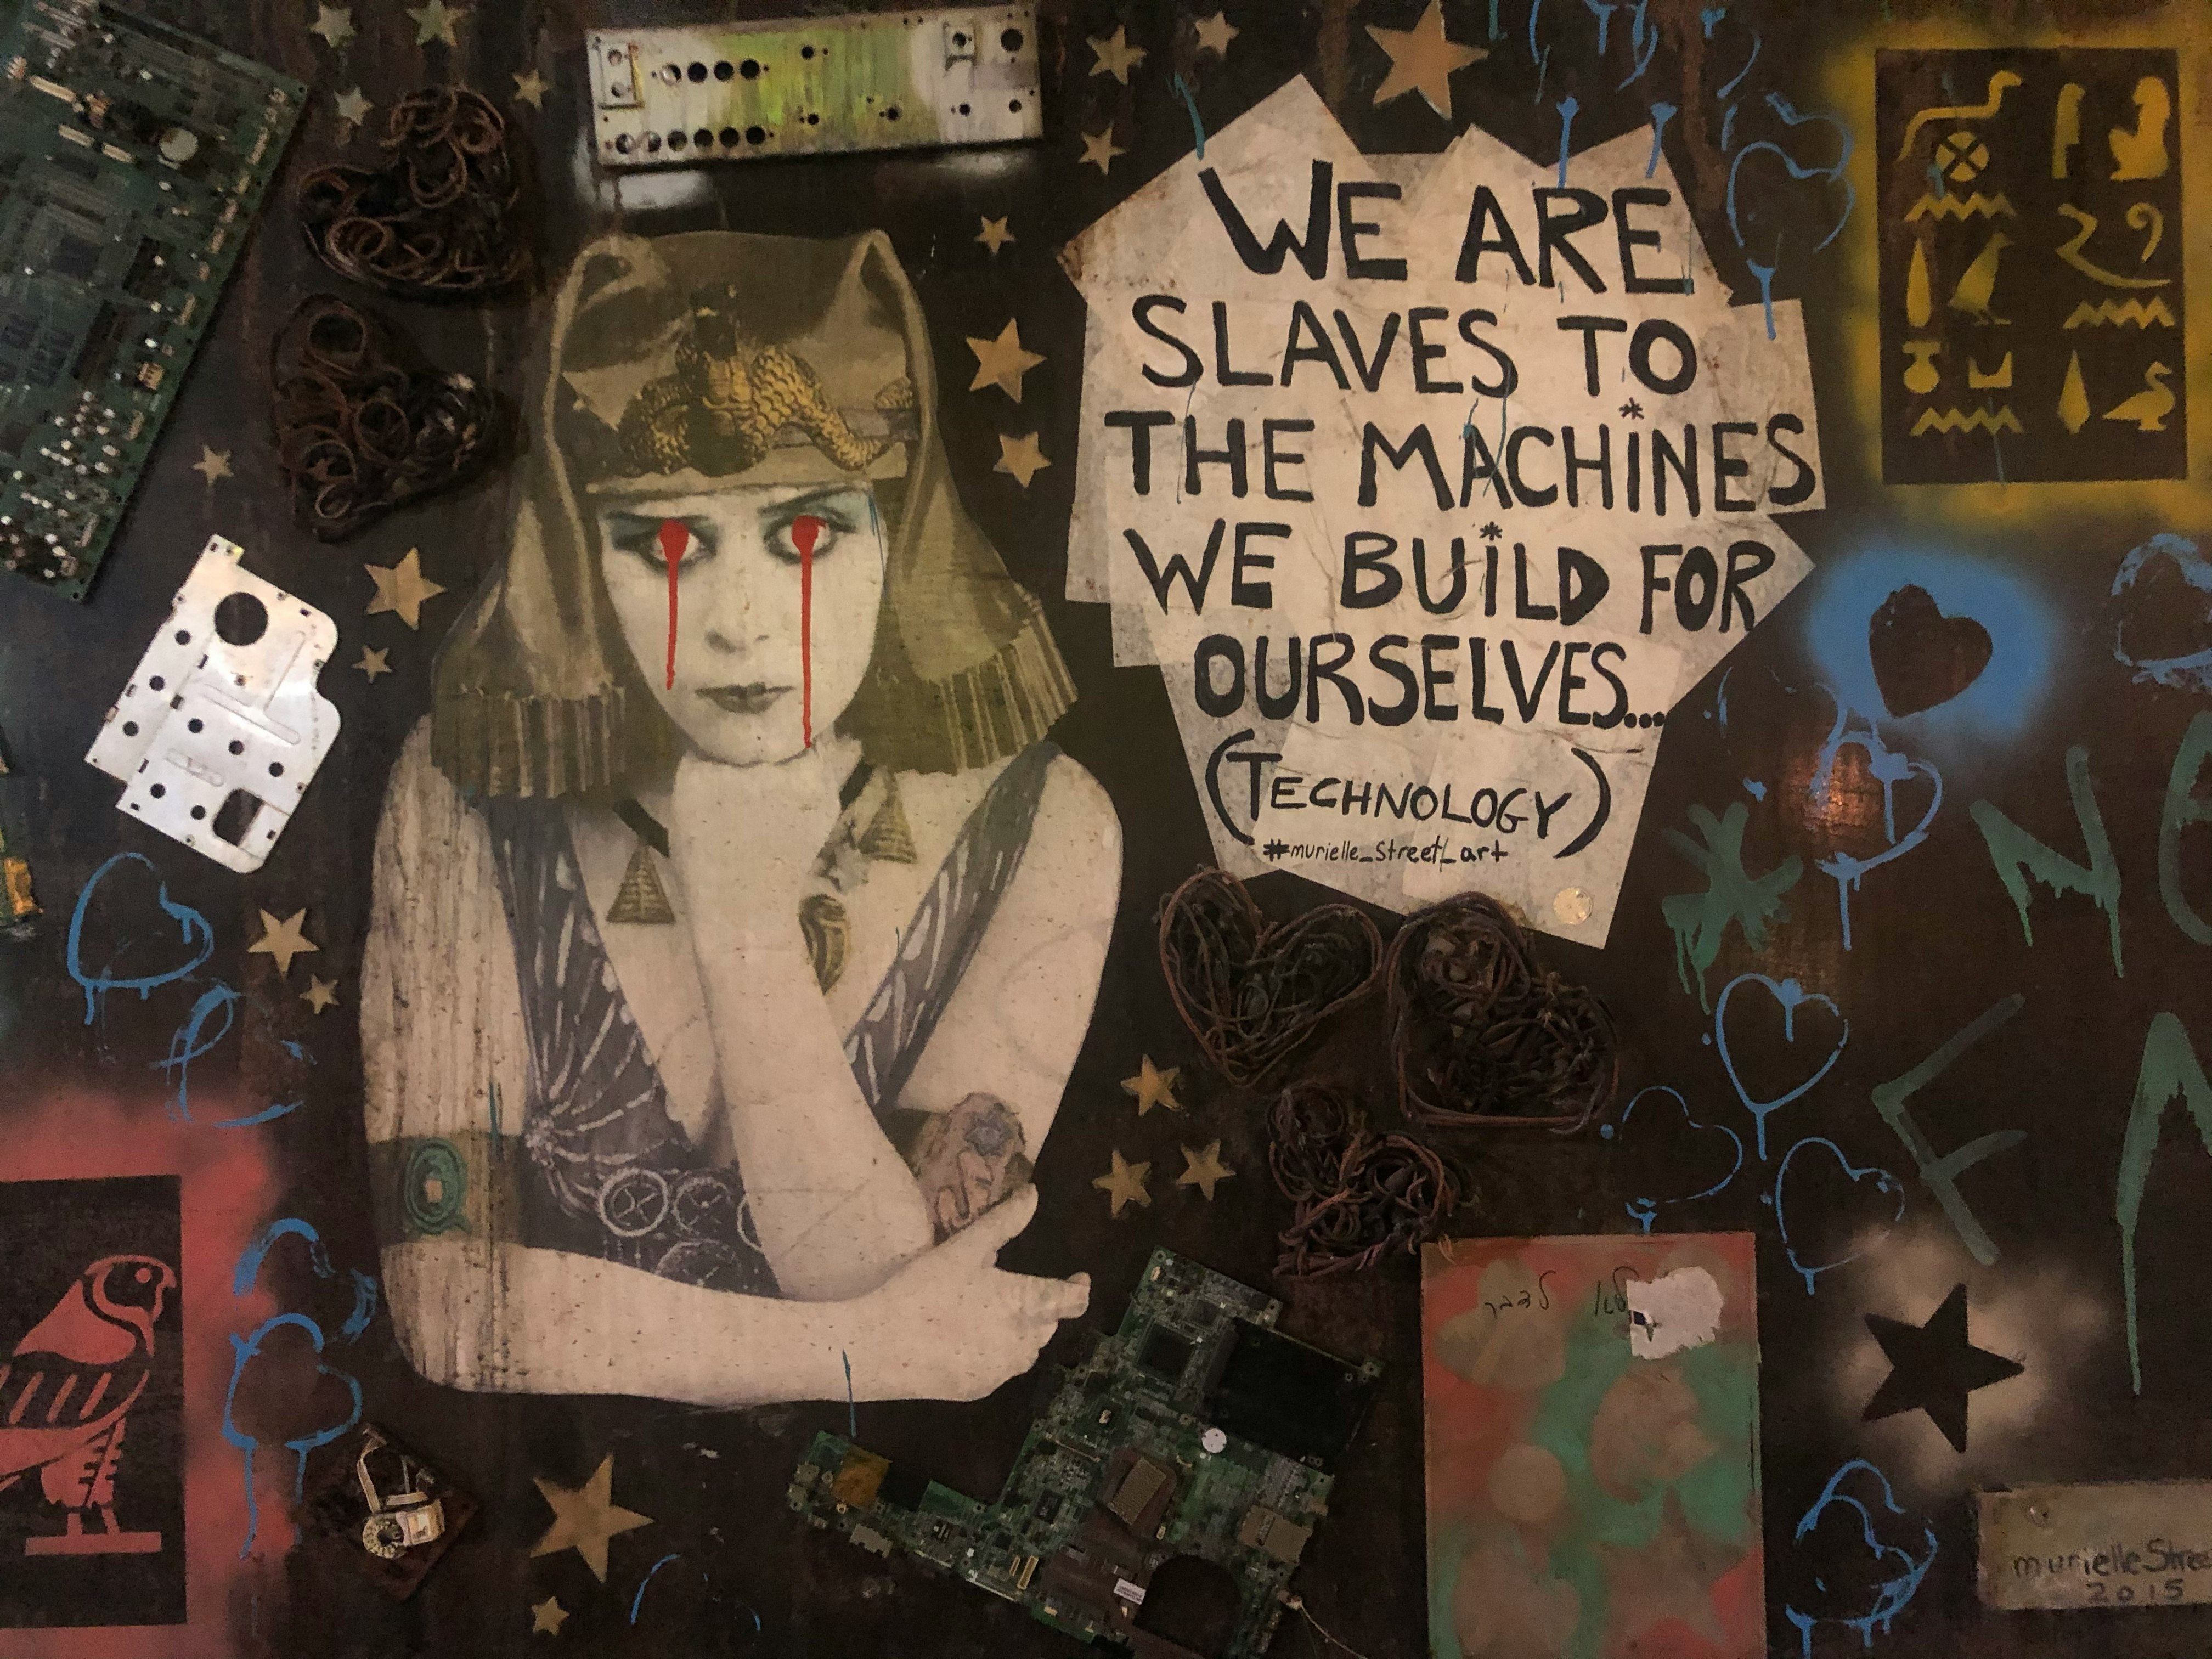 We are slaves to the machines we build for ourselves…